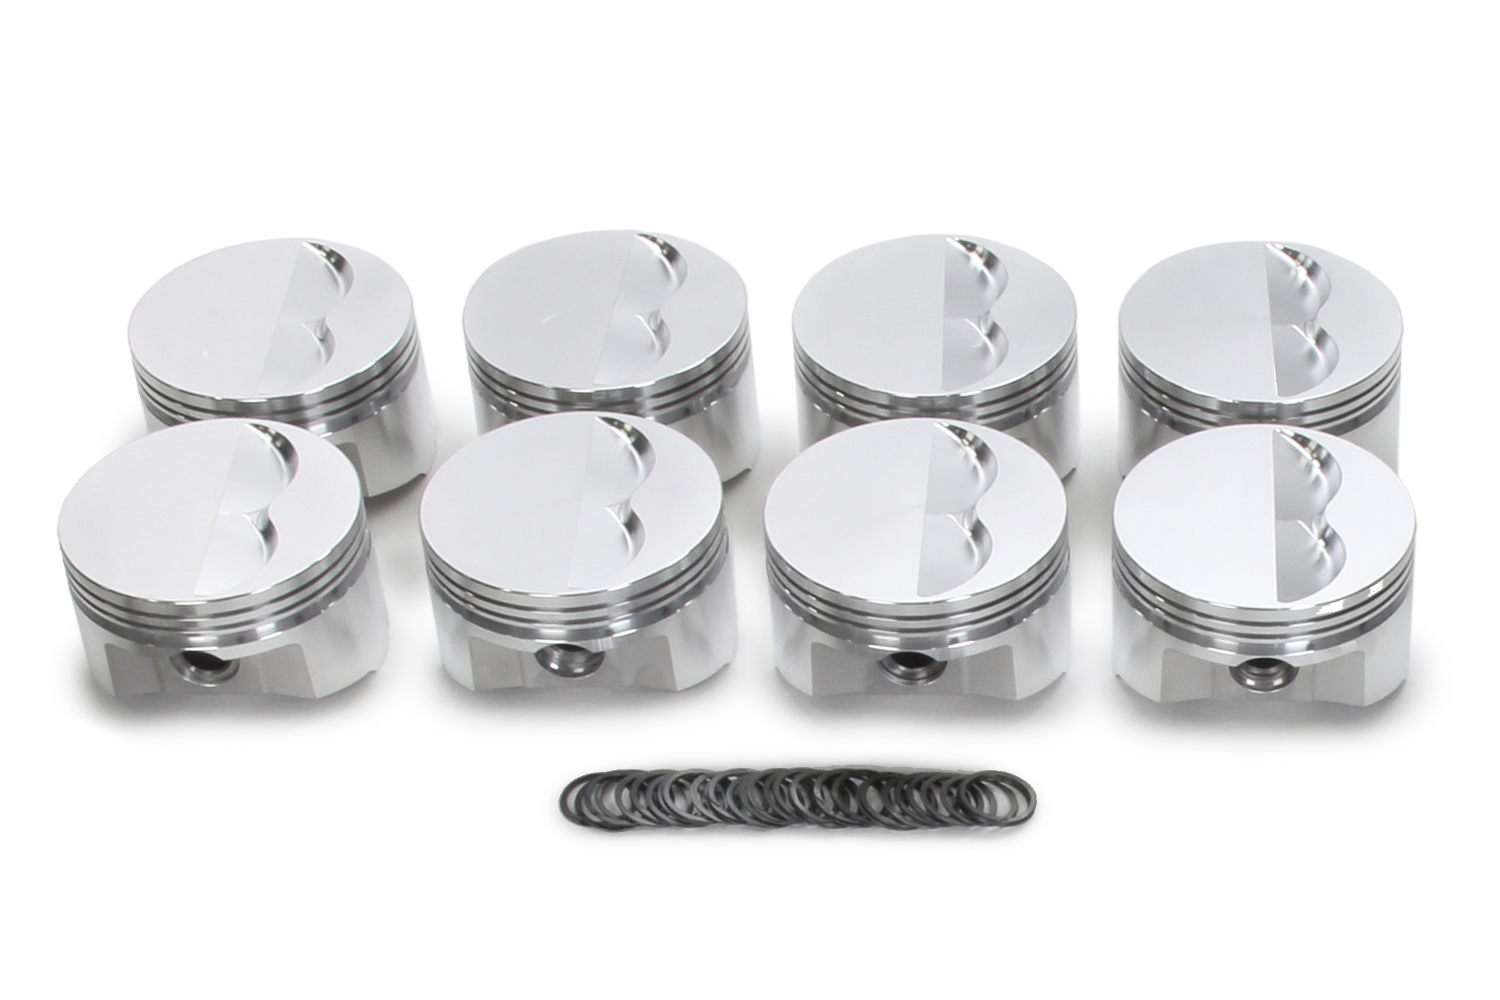 SRP Pistons 138086 Piston, 350 Flat Top, Forged, 4.040 in Bore, 1/16 x 1/16 x 3/16 in Ring Grooves, Minus 5.00 cc, Small Block Chevy, Set of 8